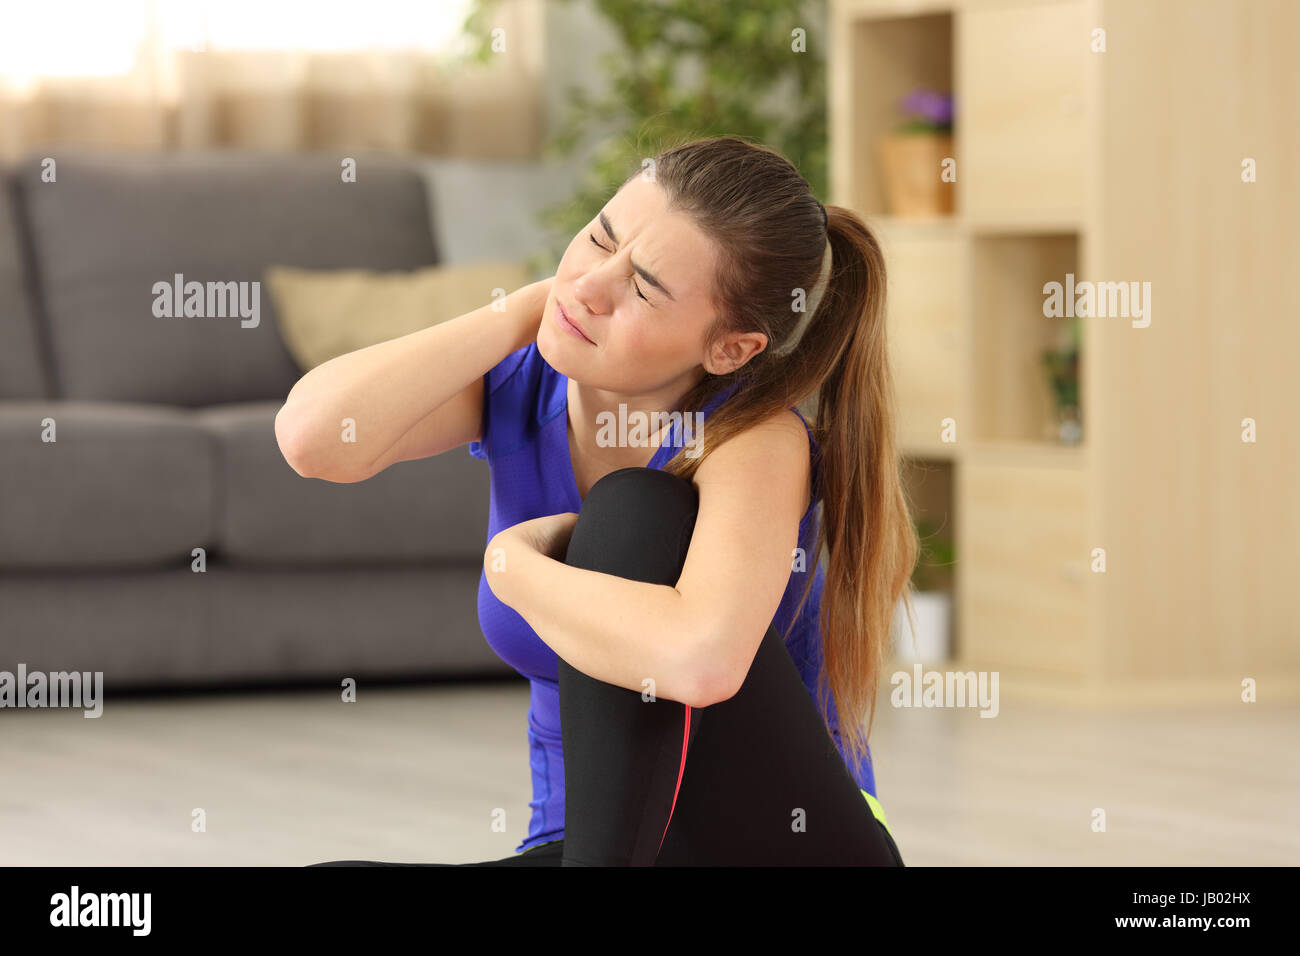 Sportswoman suffering neck ache sitting on the floor in the living room in a house interior with a homey background Stock Photo